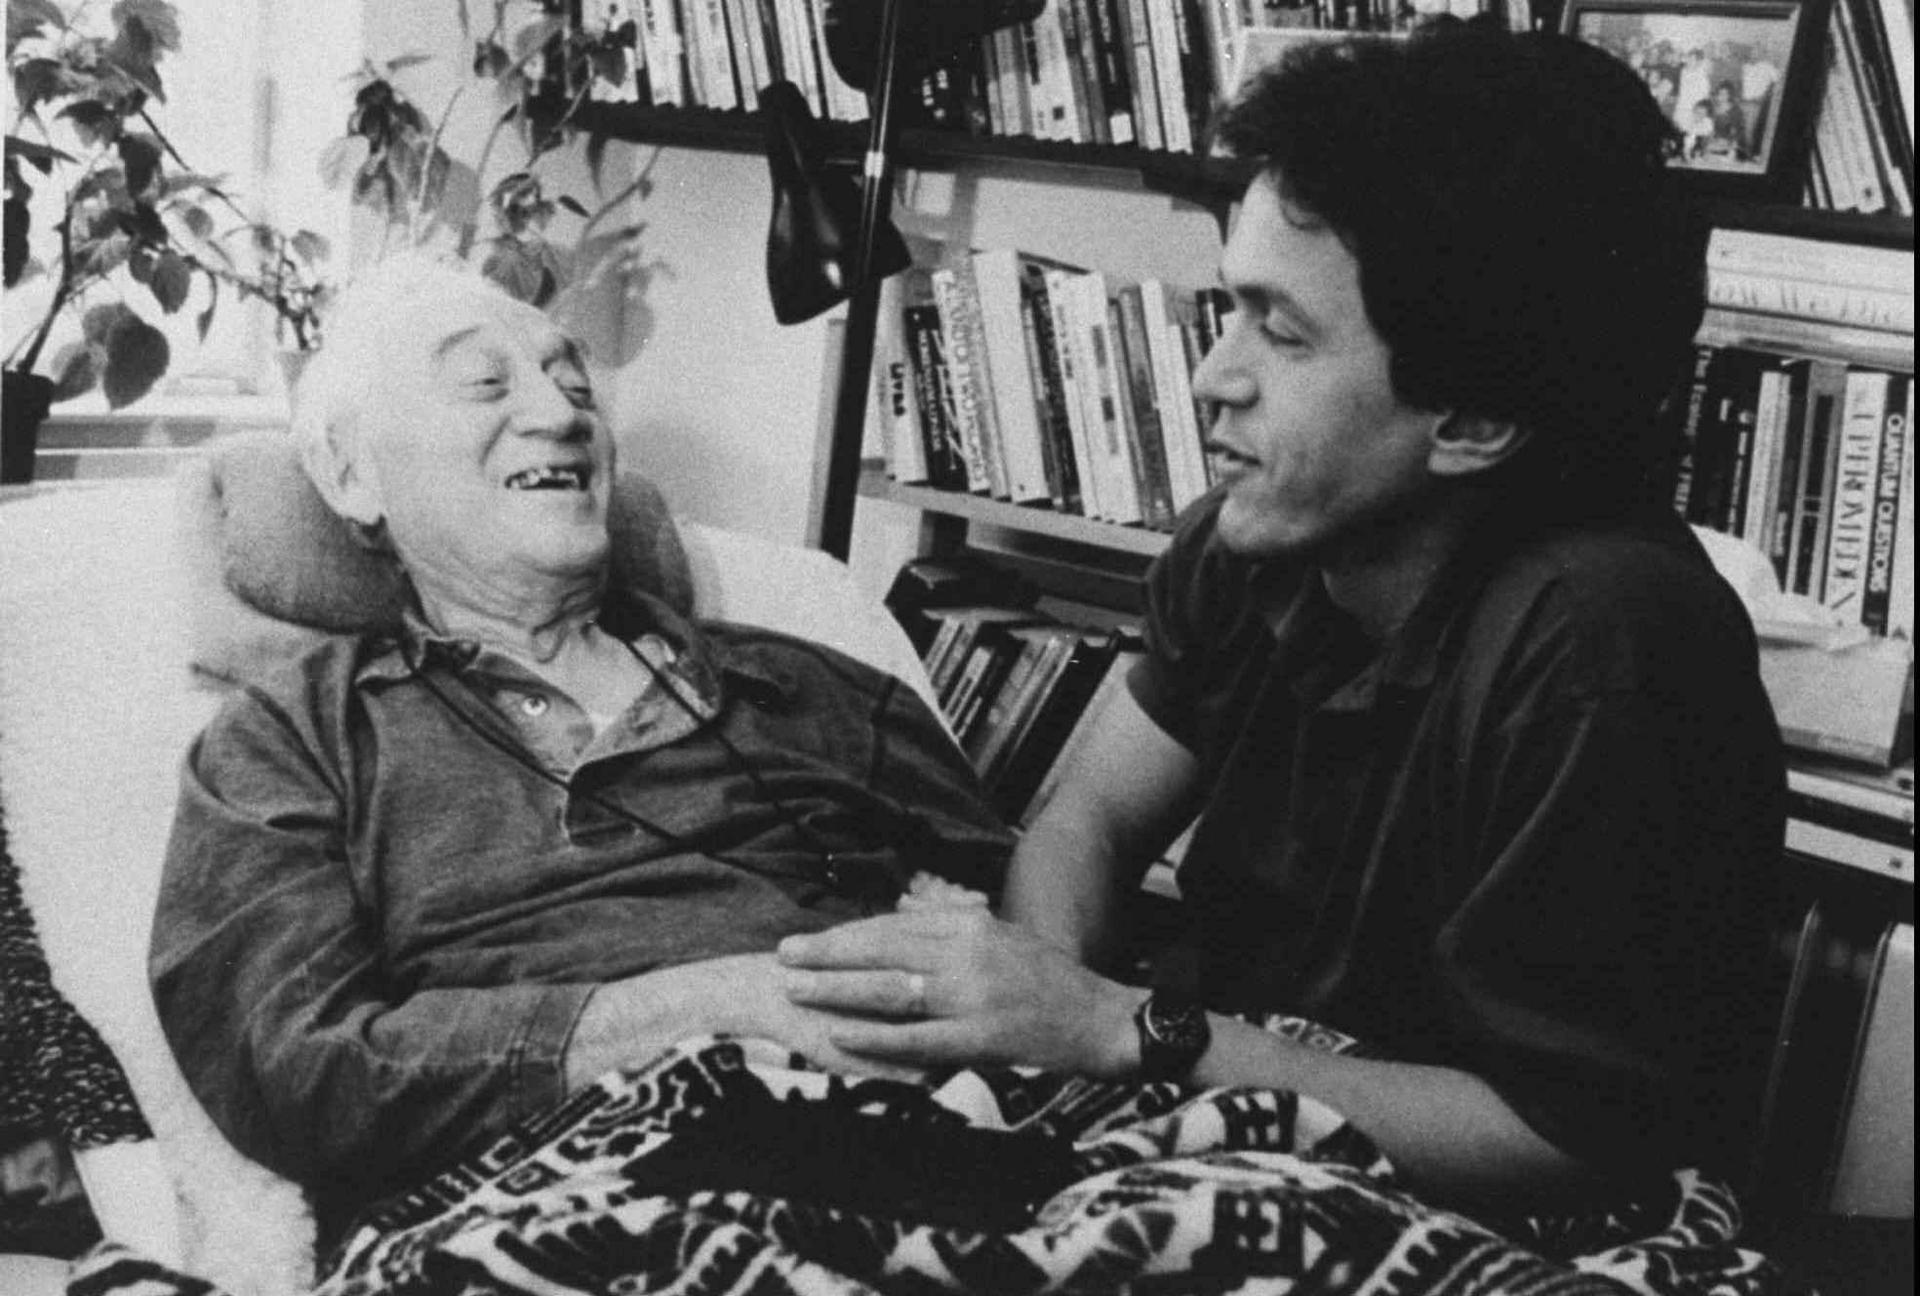 Book Review: "Tuesdays with Morrie" by Mitch Albom - SevenPonds